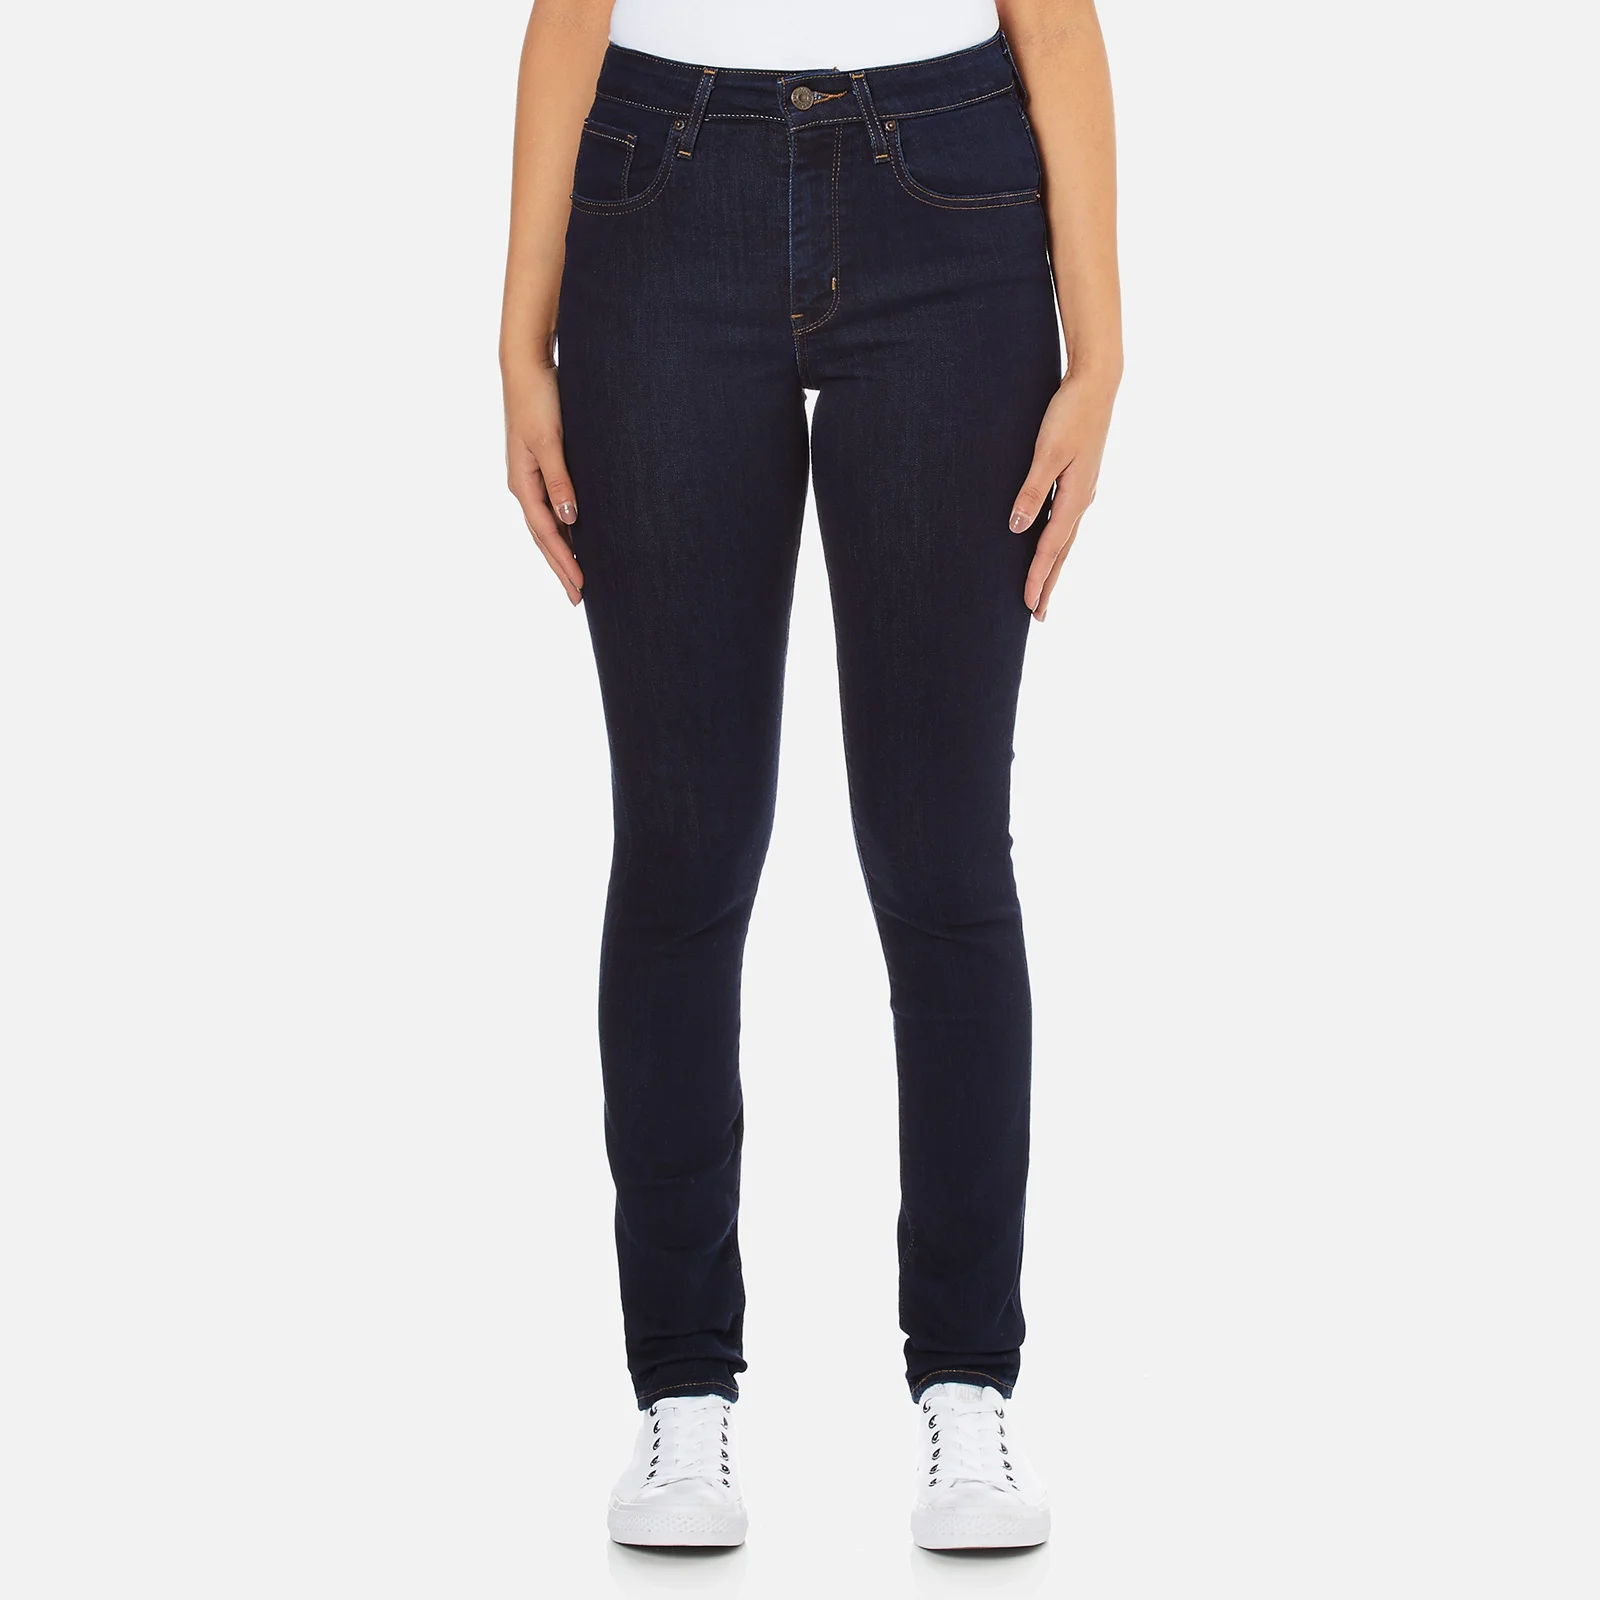 Levi's Women's 721 High Rise Skinny Fit Jeans - Lone Wolf Image 1